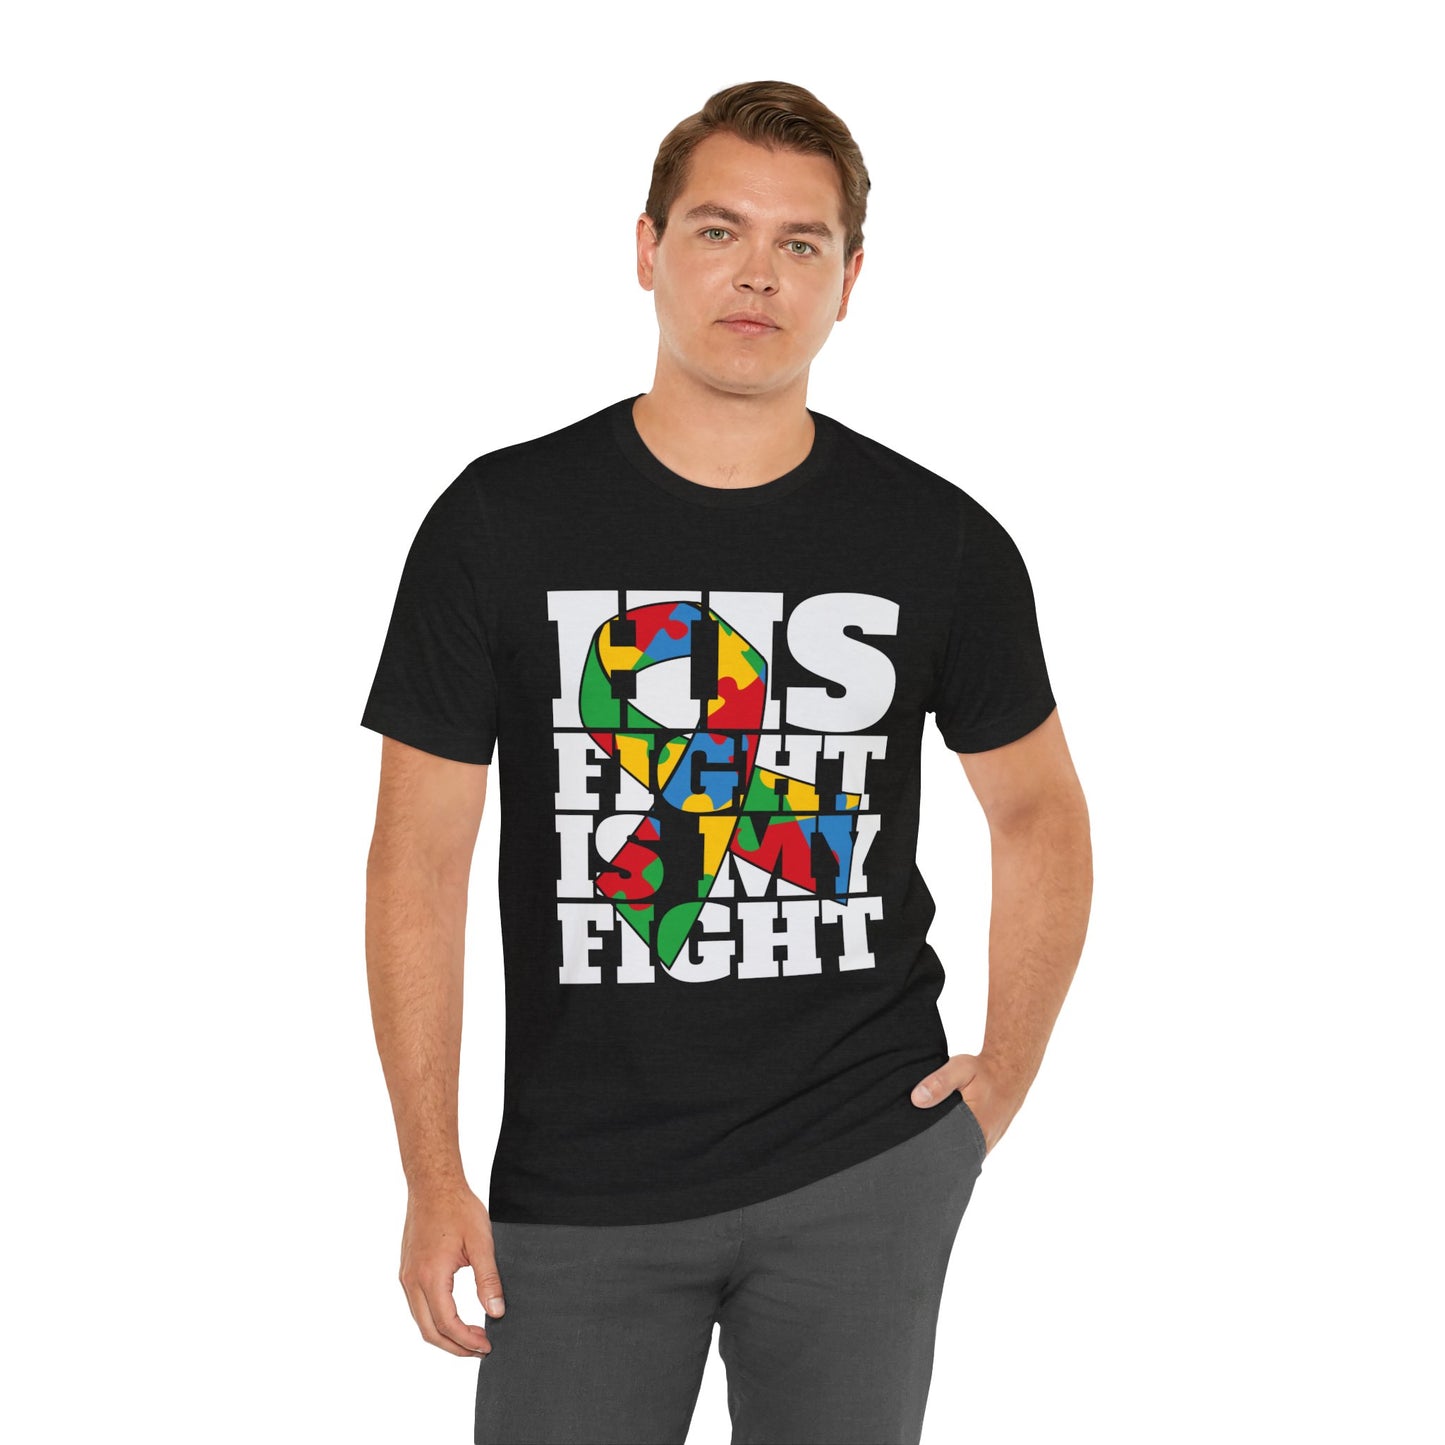 Autism Dad His Fight is My Fight - Autism Awareness Advocate Short Sleeve Tee